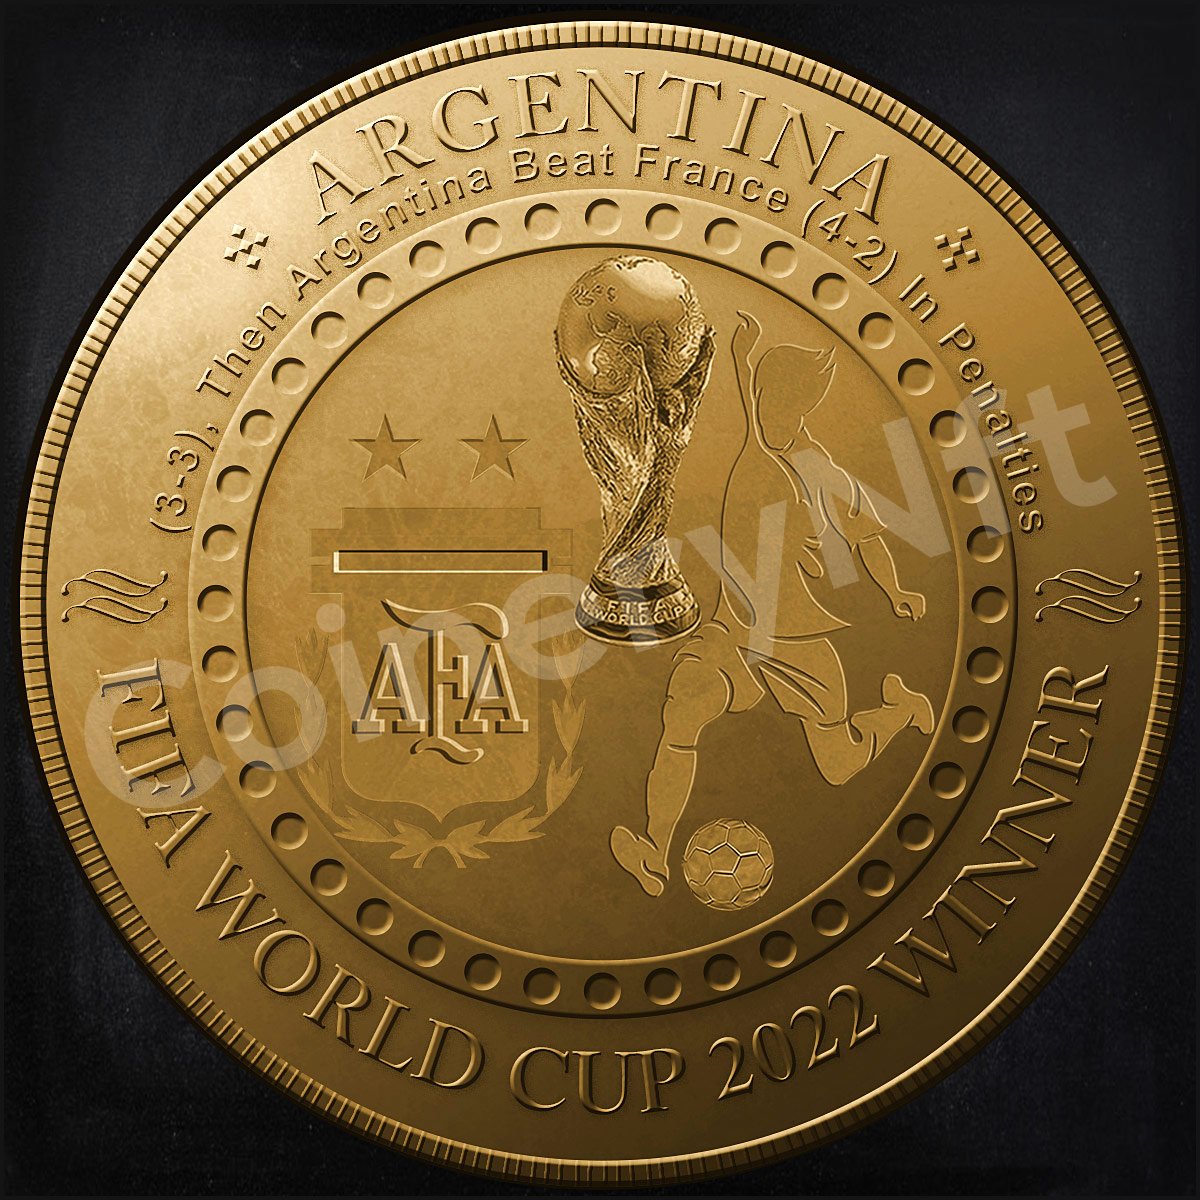 FIFA World Cup 2022, was won by Argentina Beat France. There is an NFT coin made in memory of this event @opensea @FIFAWorldCup @fifamedia @FIFAcom #nftcommunity #nftcollector #nftinvestor #nftnews #nftmagazine #nftgallery #nftbuyers #NFTshills #nftgame #worldcup #cryptonews #NFT